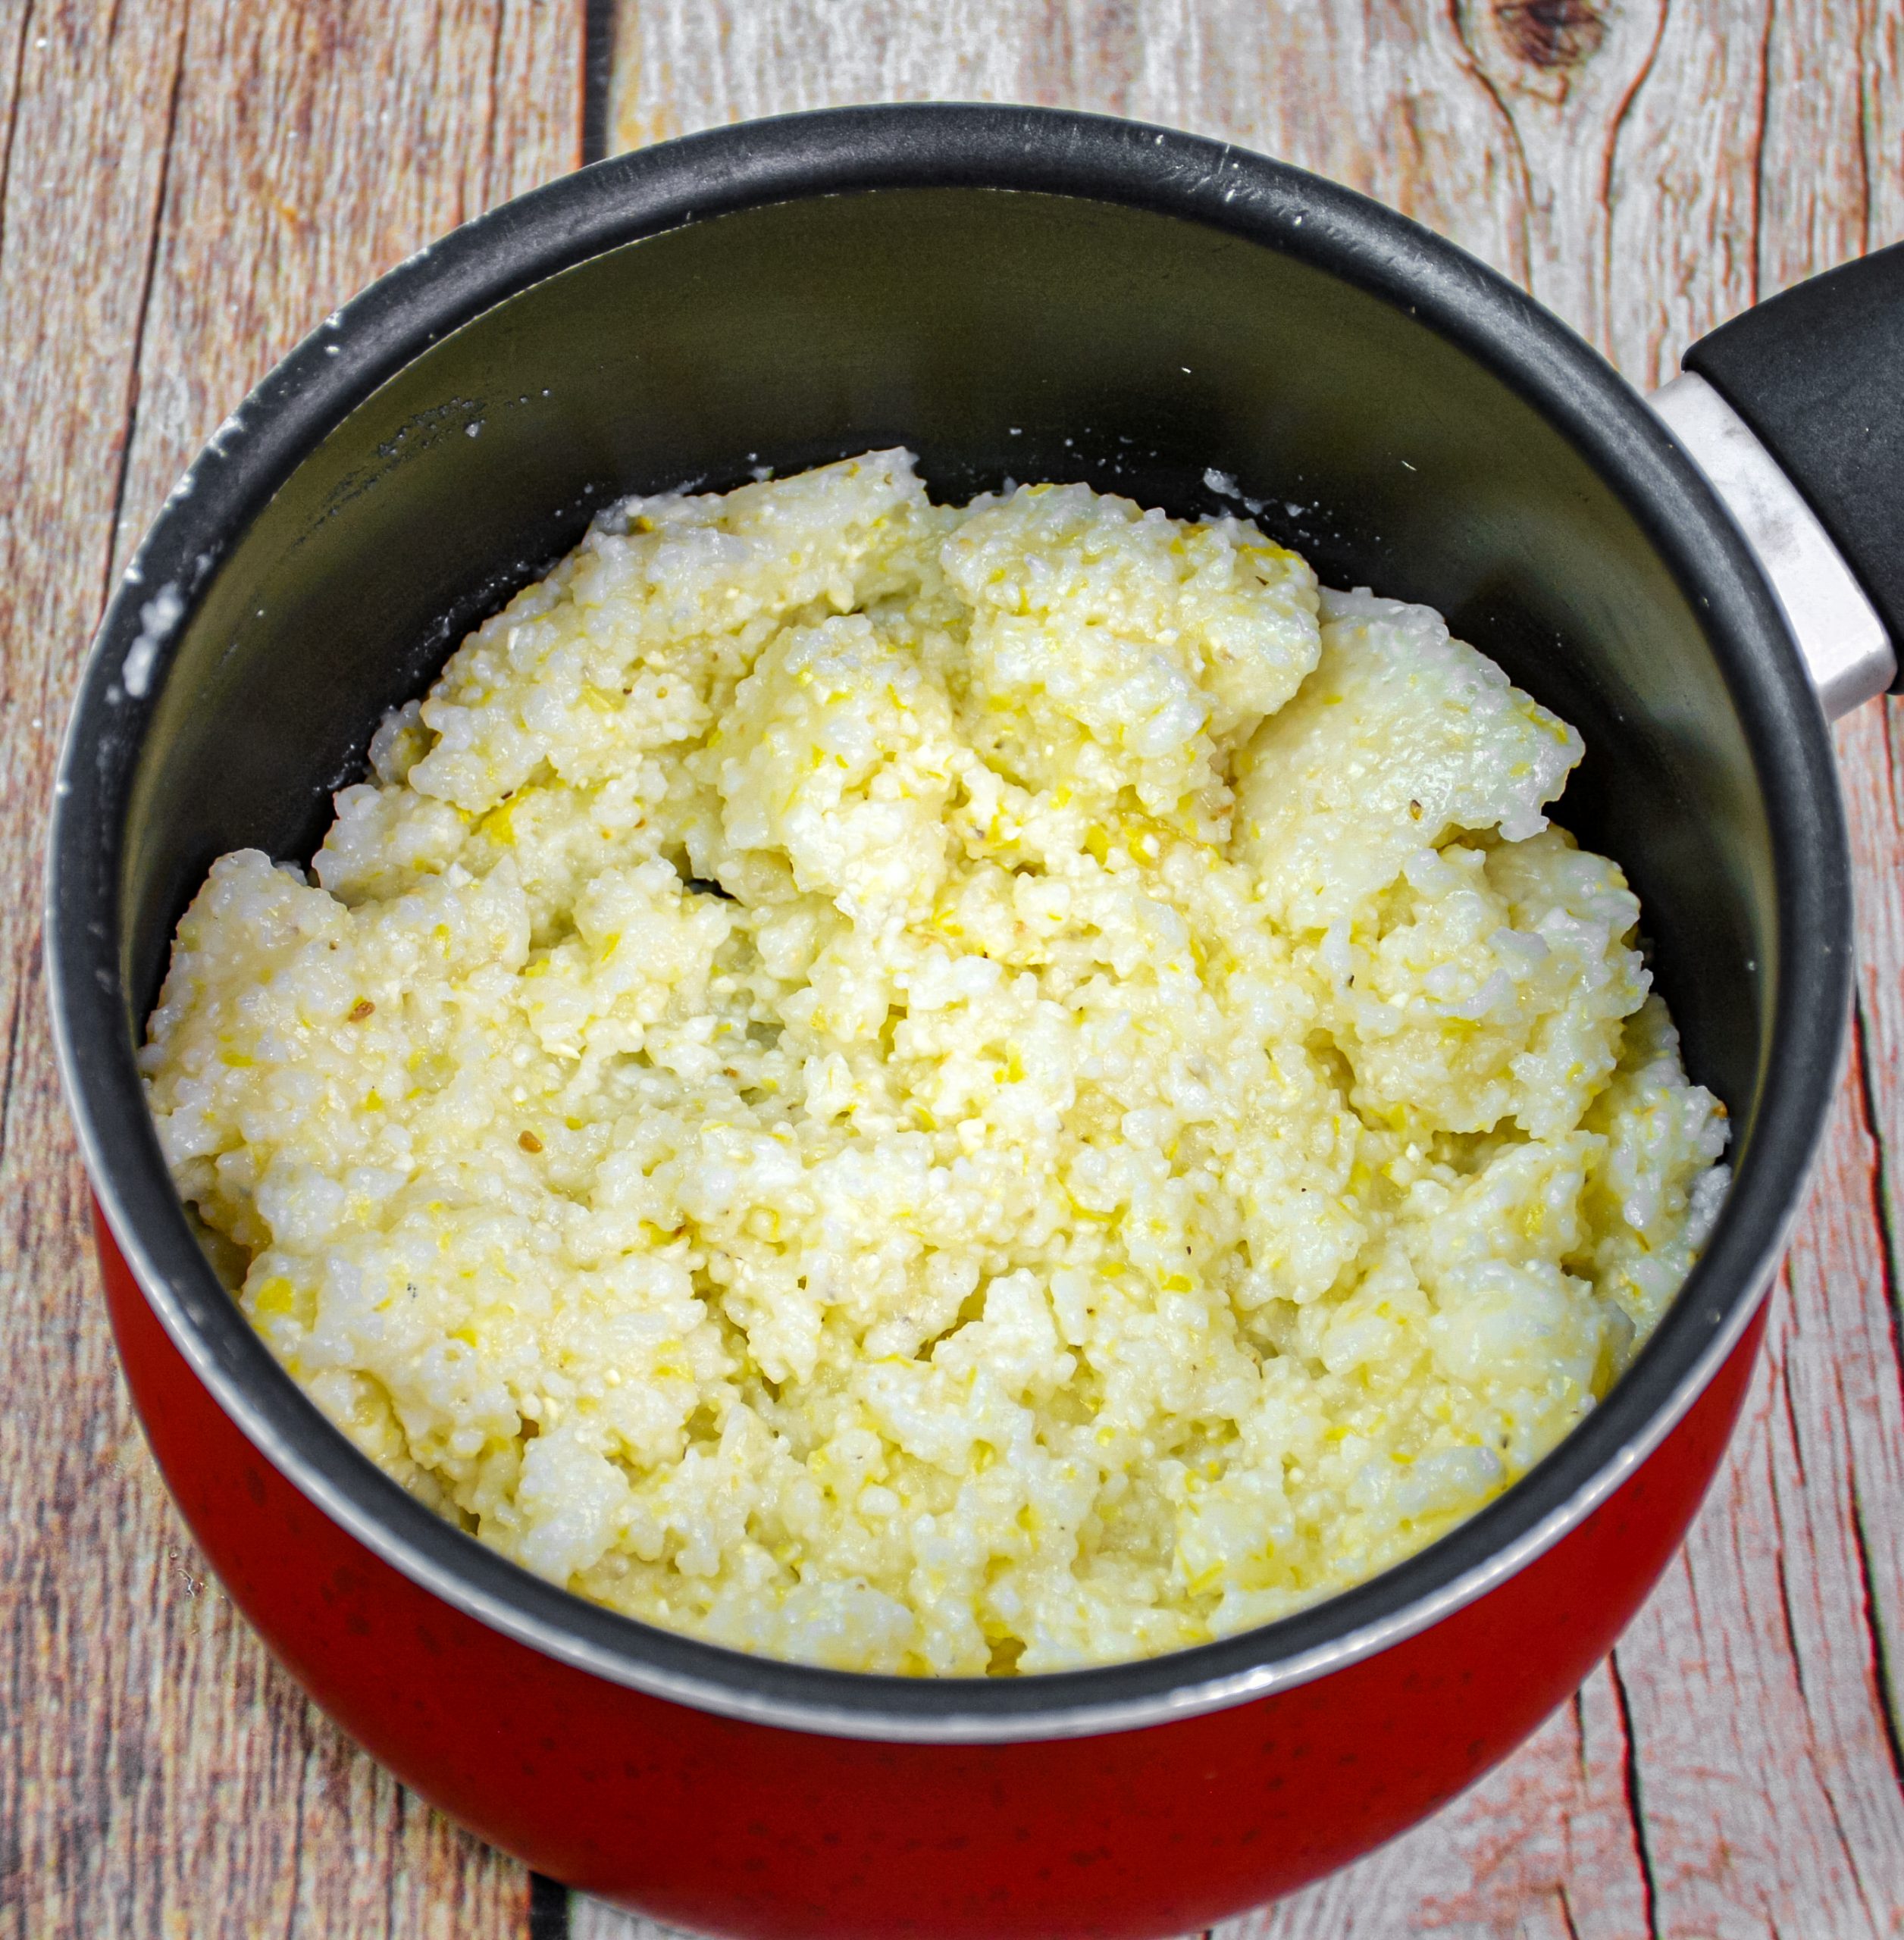 Reduce the heat, continuing to whisk allowing the grits to cook for 15 minutes.